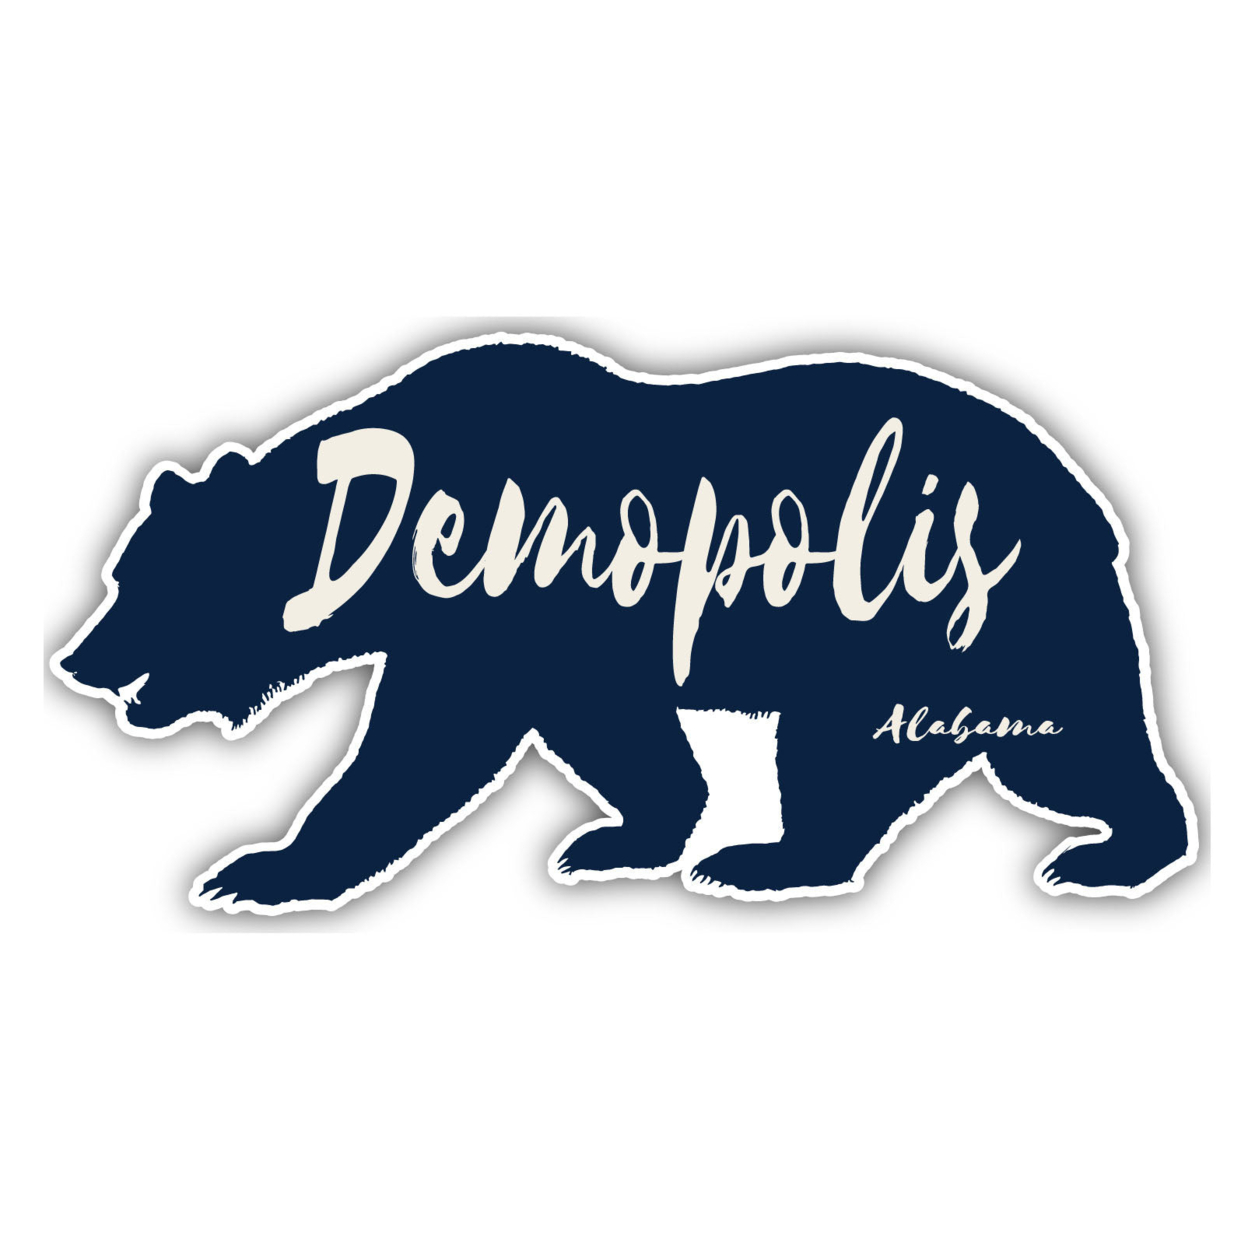 Demopolis Alabama Souvenir Decorative Stickers (Choose Theme And Size) - 4-Pack, 10-Inch, Great Outdoors